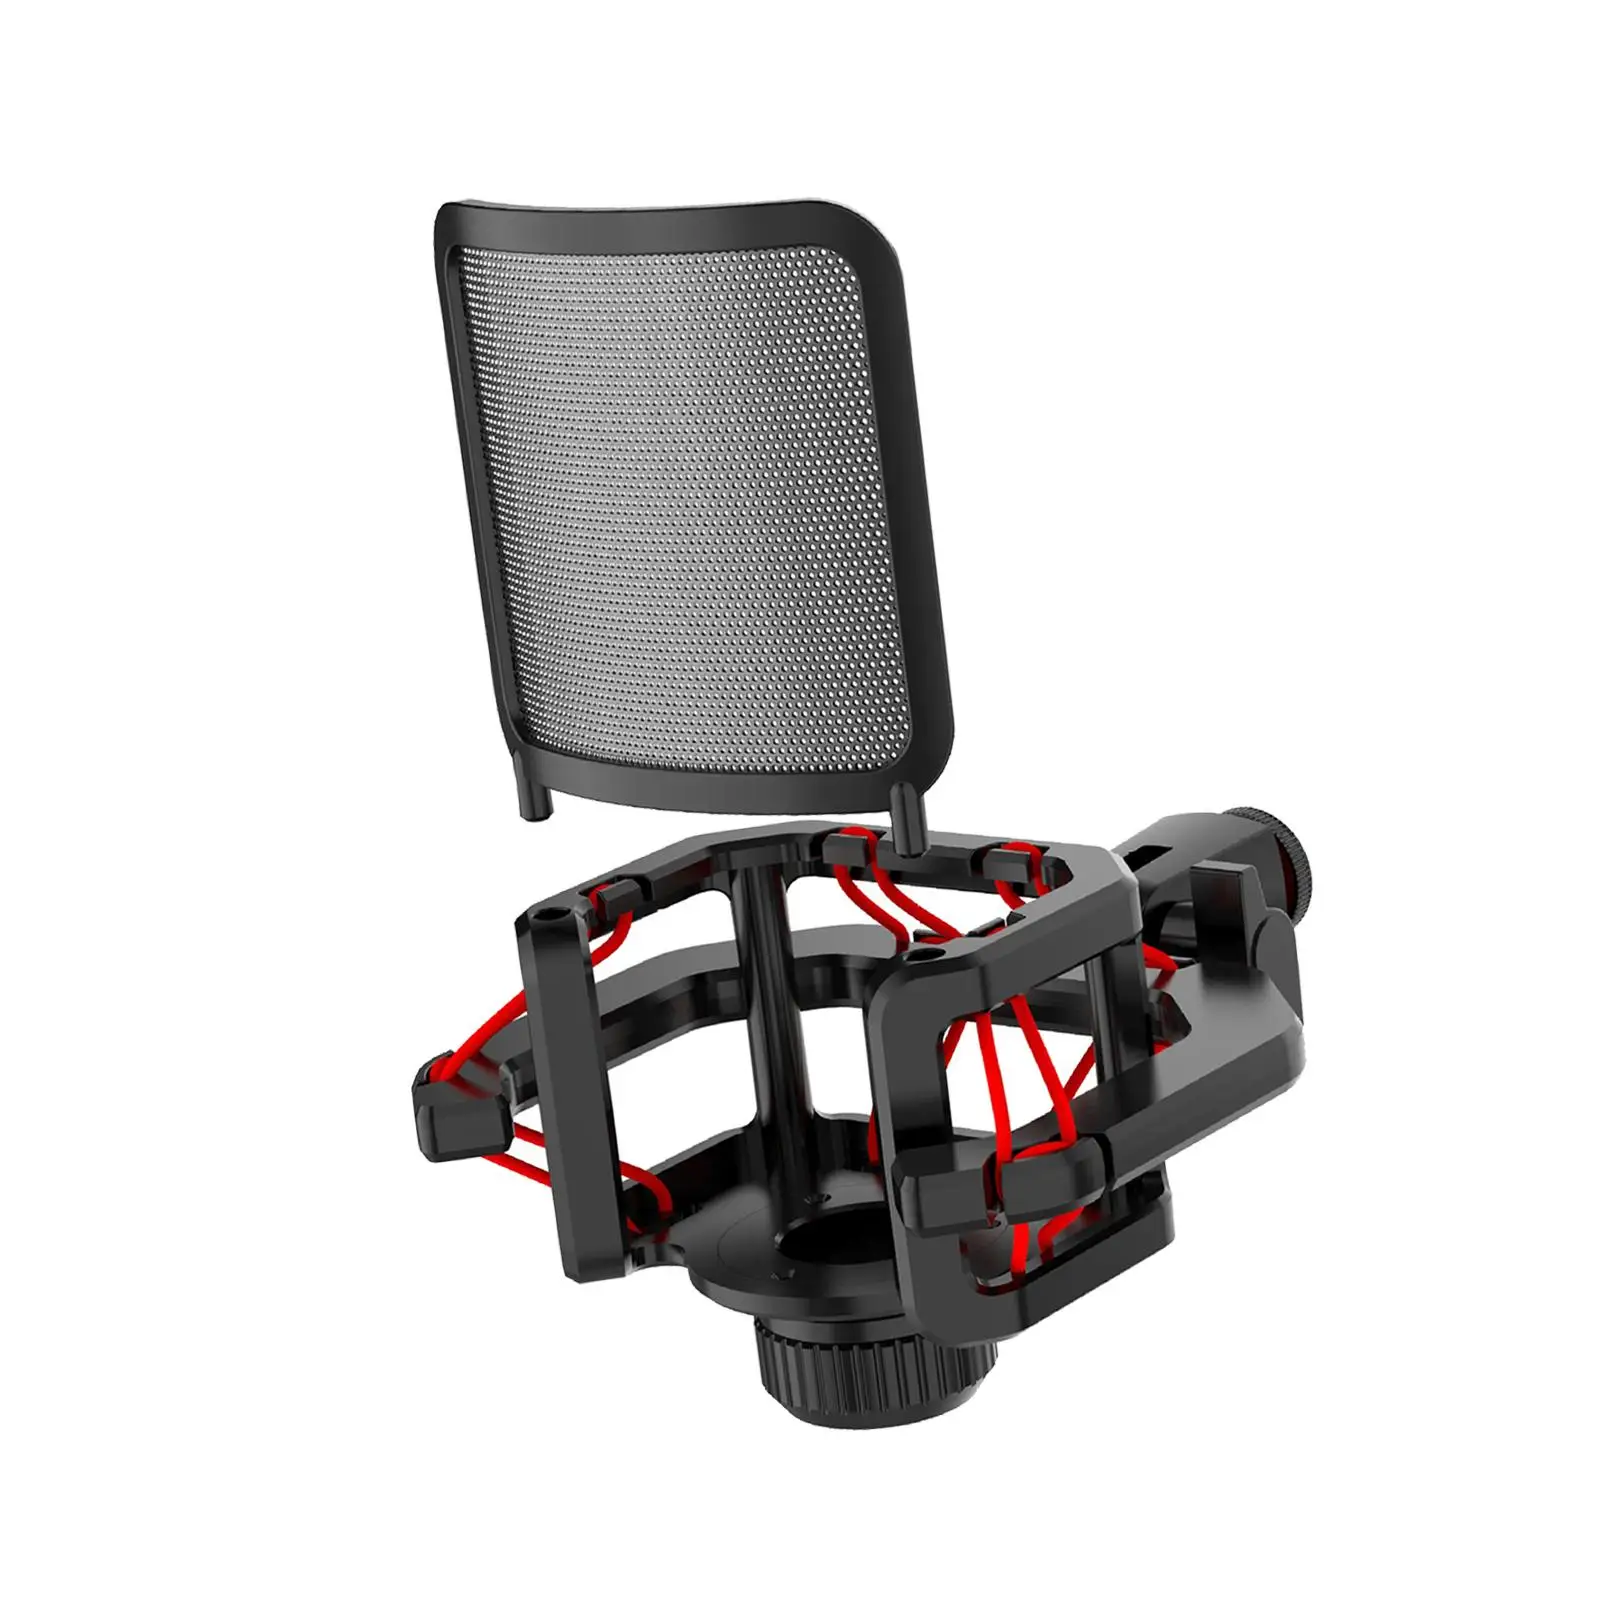 Microphone Shock Mount  Mic Shock Mount Holder for Recording Home